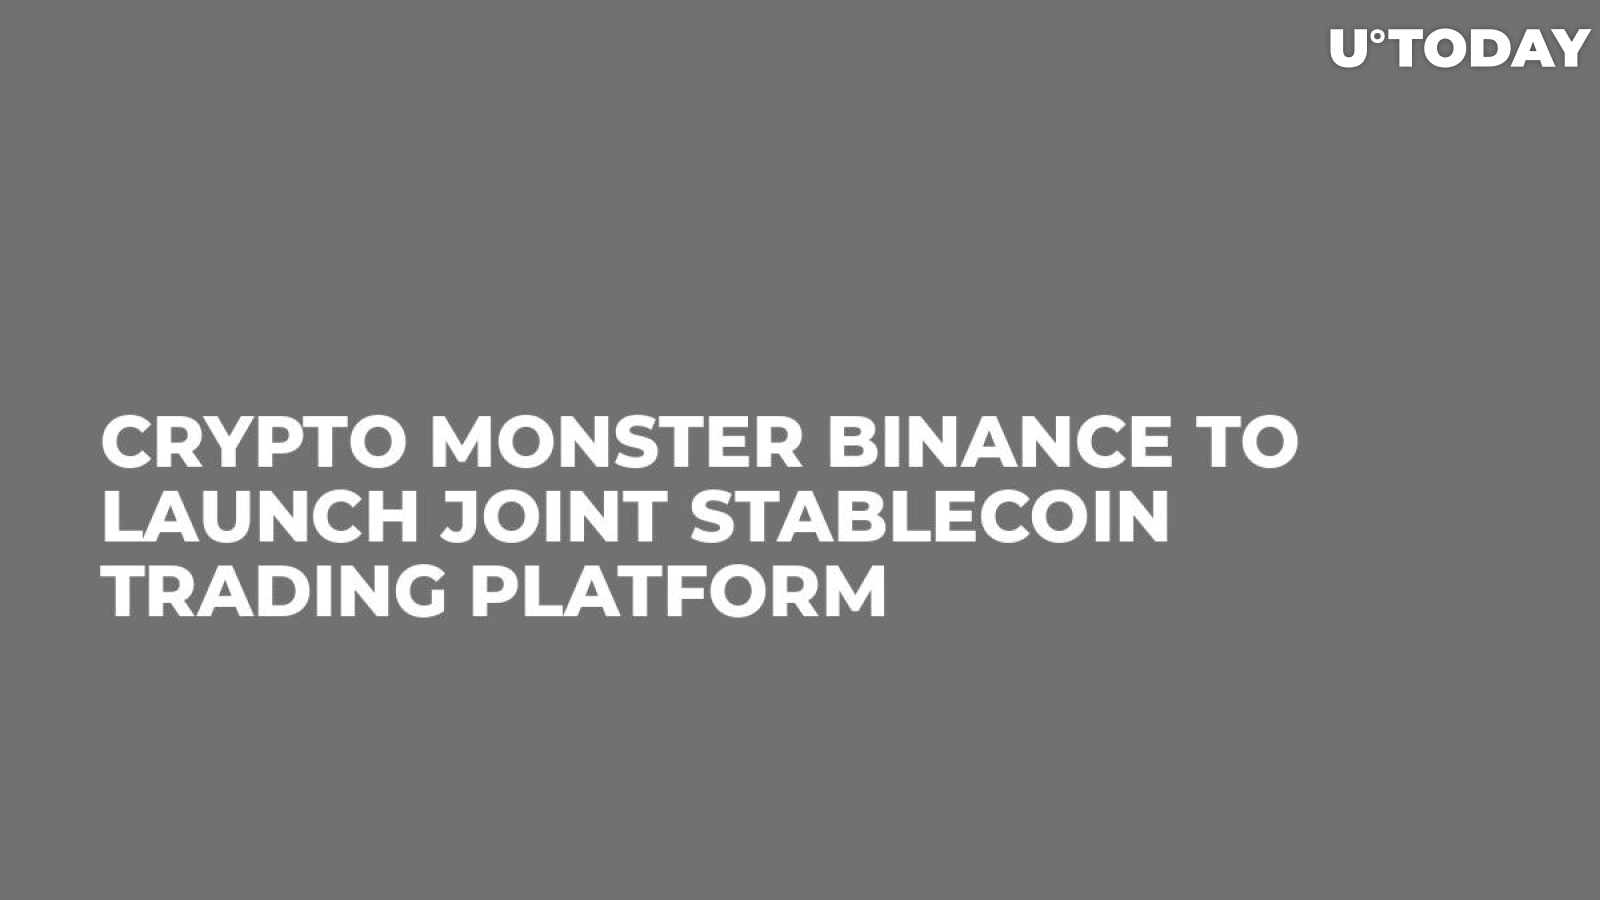 Crypto Monster Binance to Launch Joint Stablecoin Trading Platform